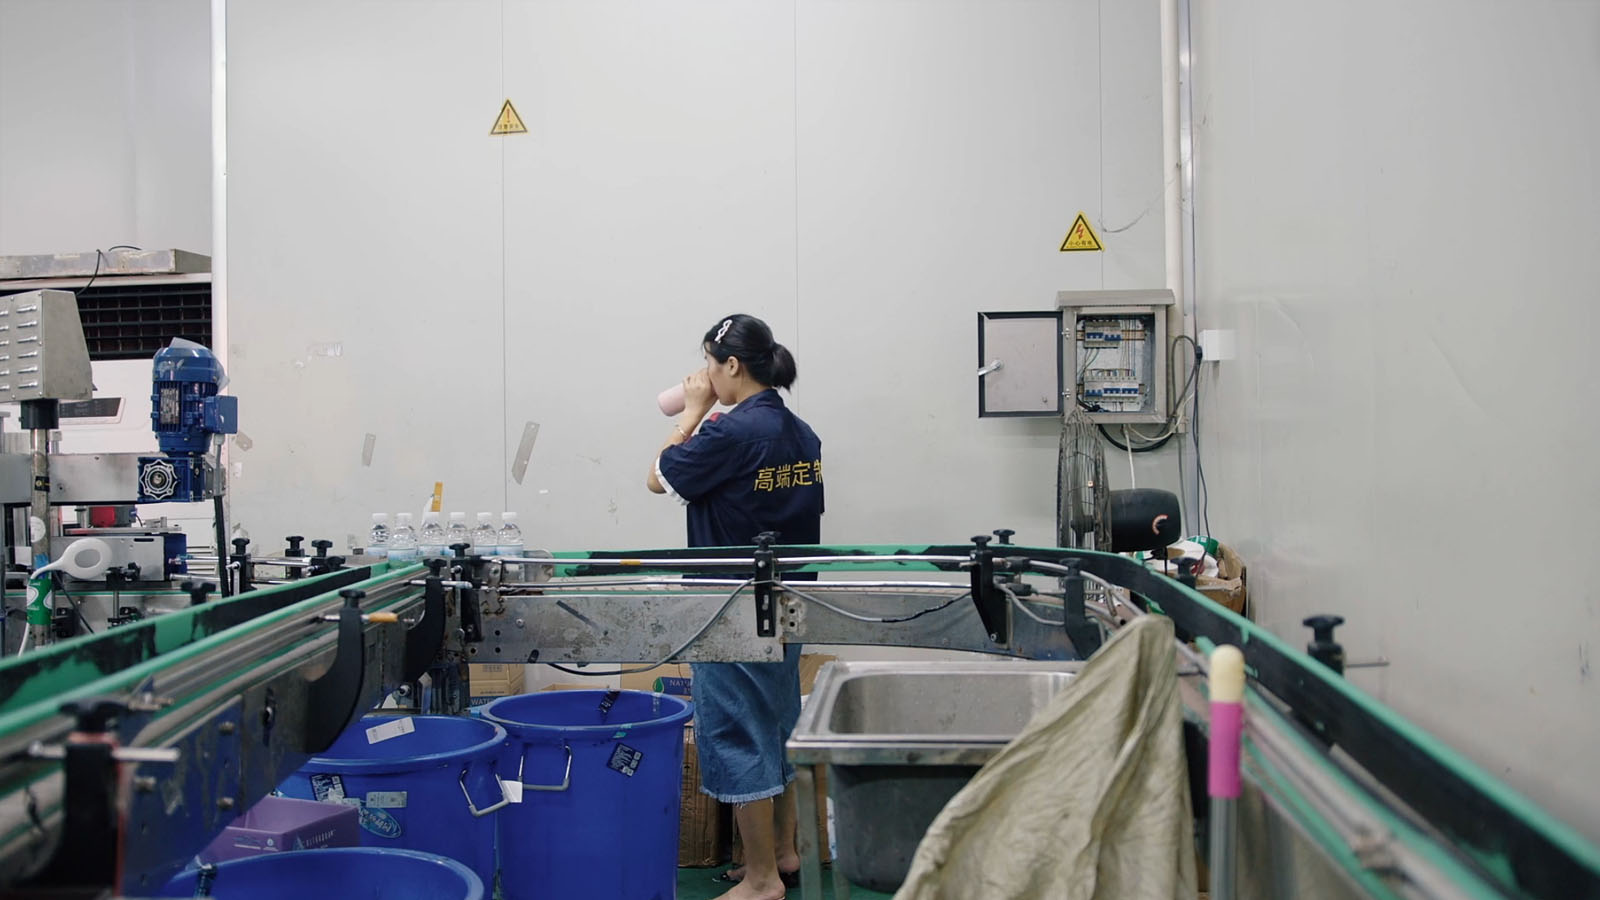 Worker takes a drink during a shift at a bottling plant. Image © MTV Documentary Films